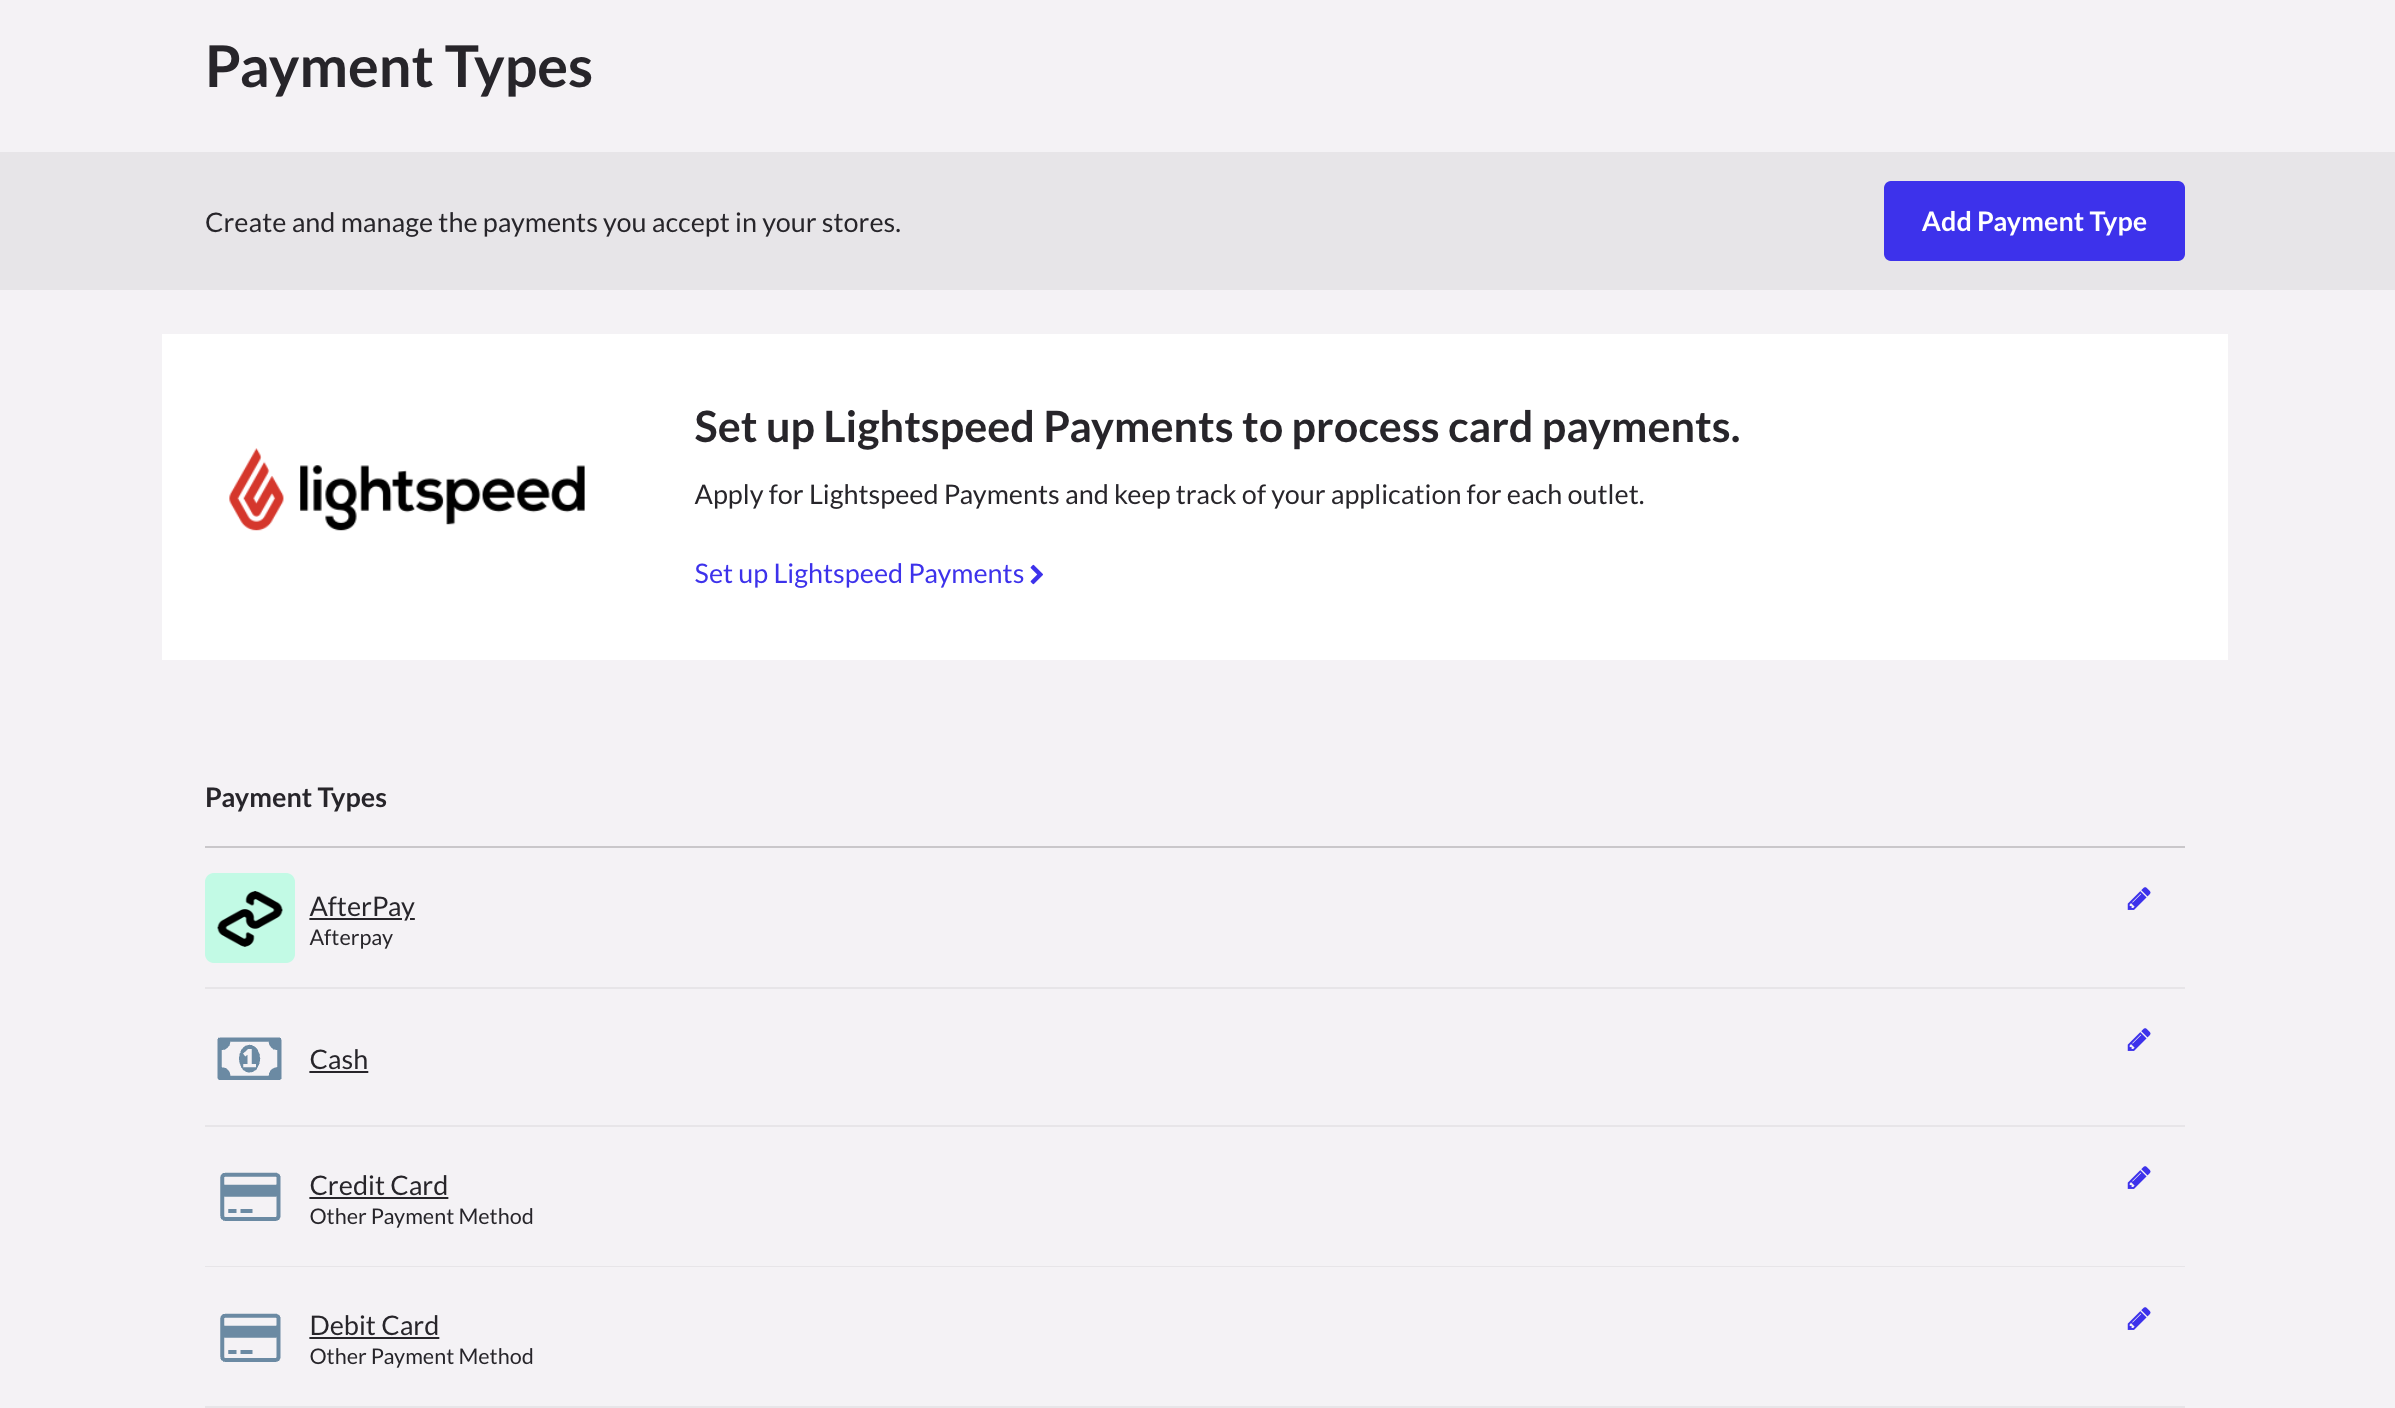 LS-Pay-Self-Serve-Payment-Types.png